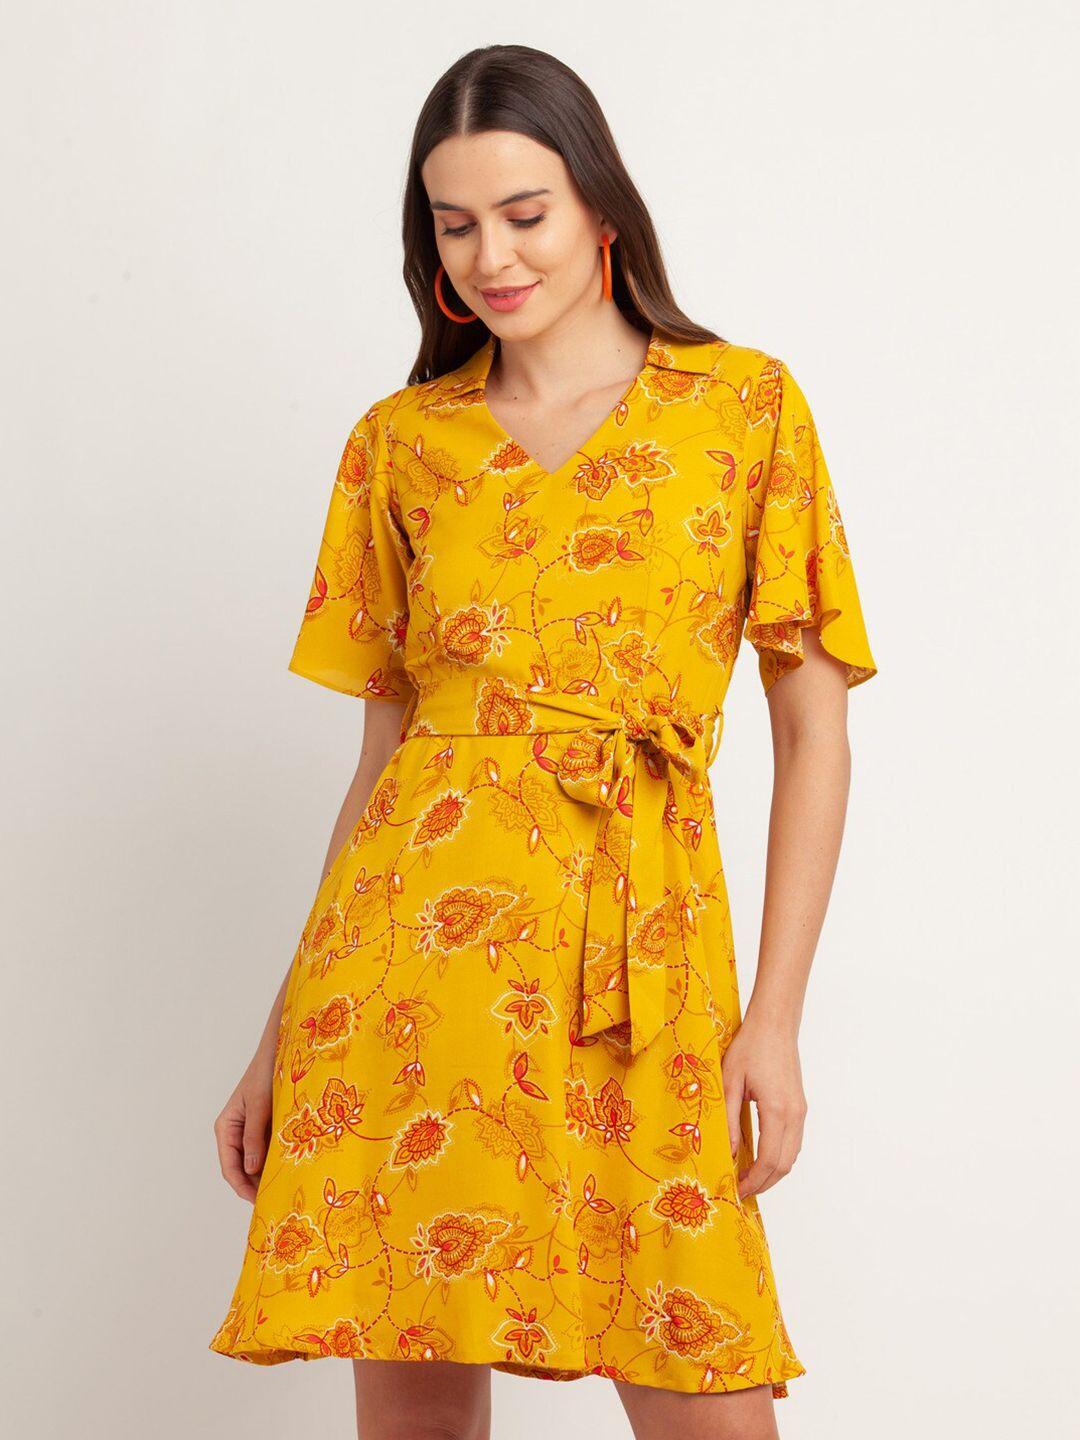 zink-london-yellow-&-red-floral-fit-&-flare-dress